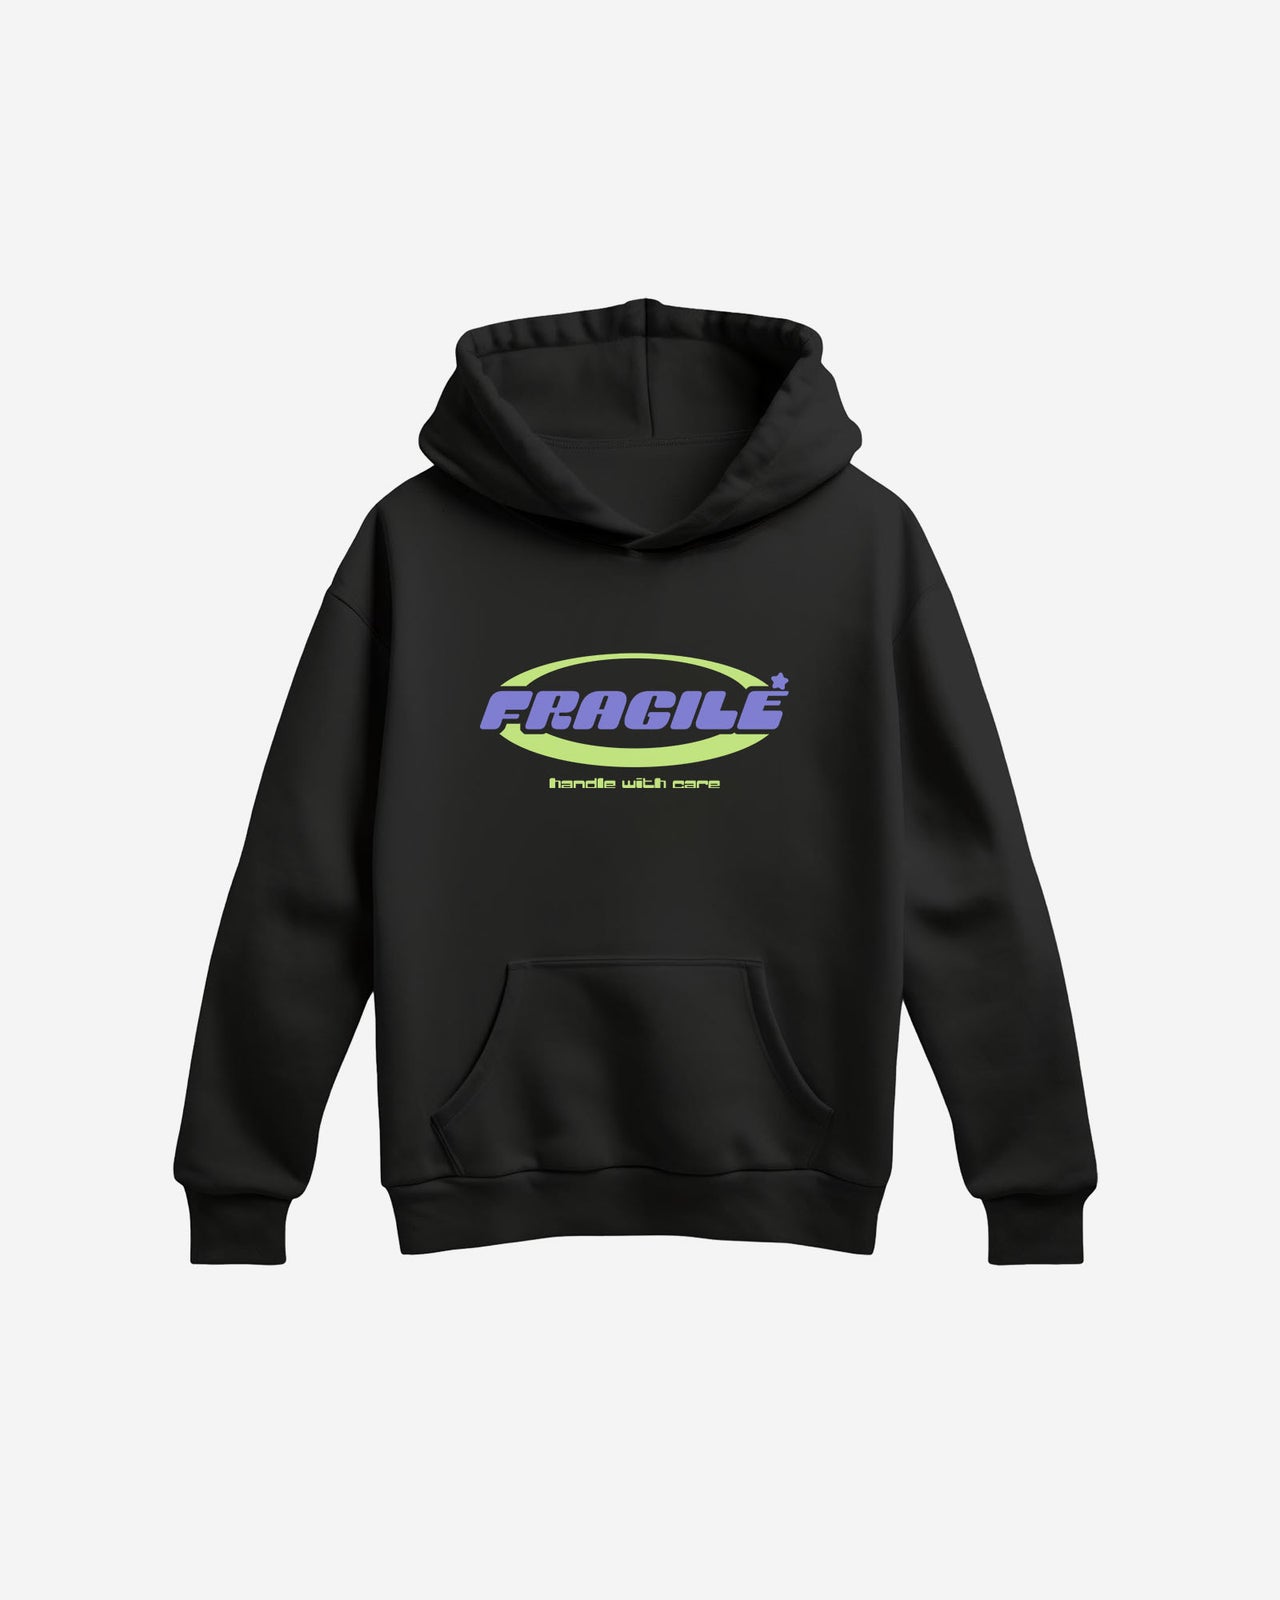 Fragile Handle With Care Regular Hoodie